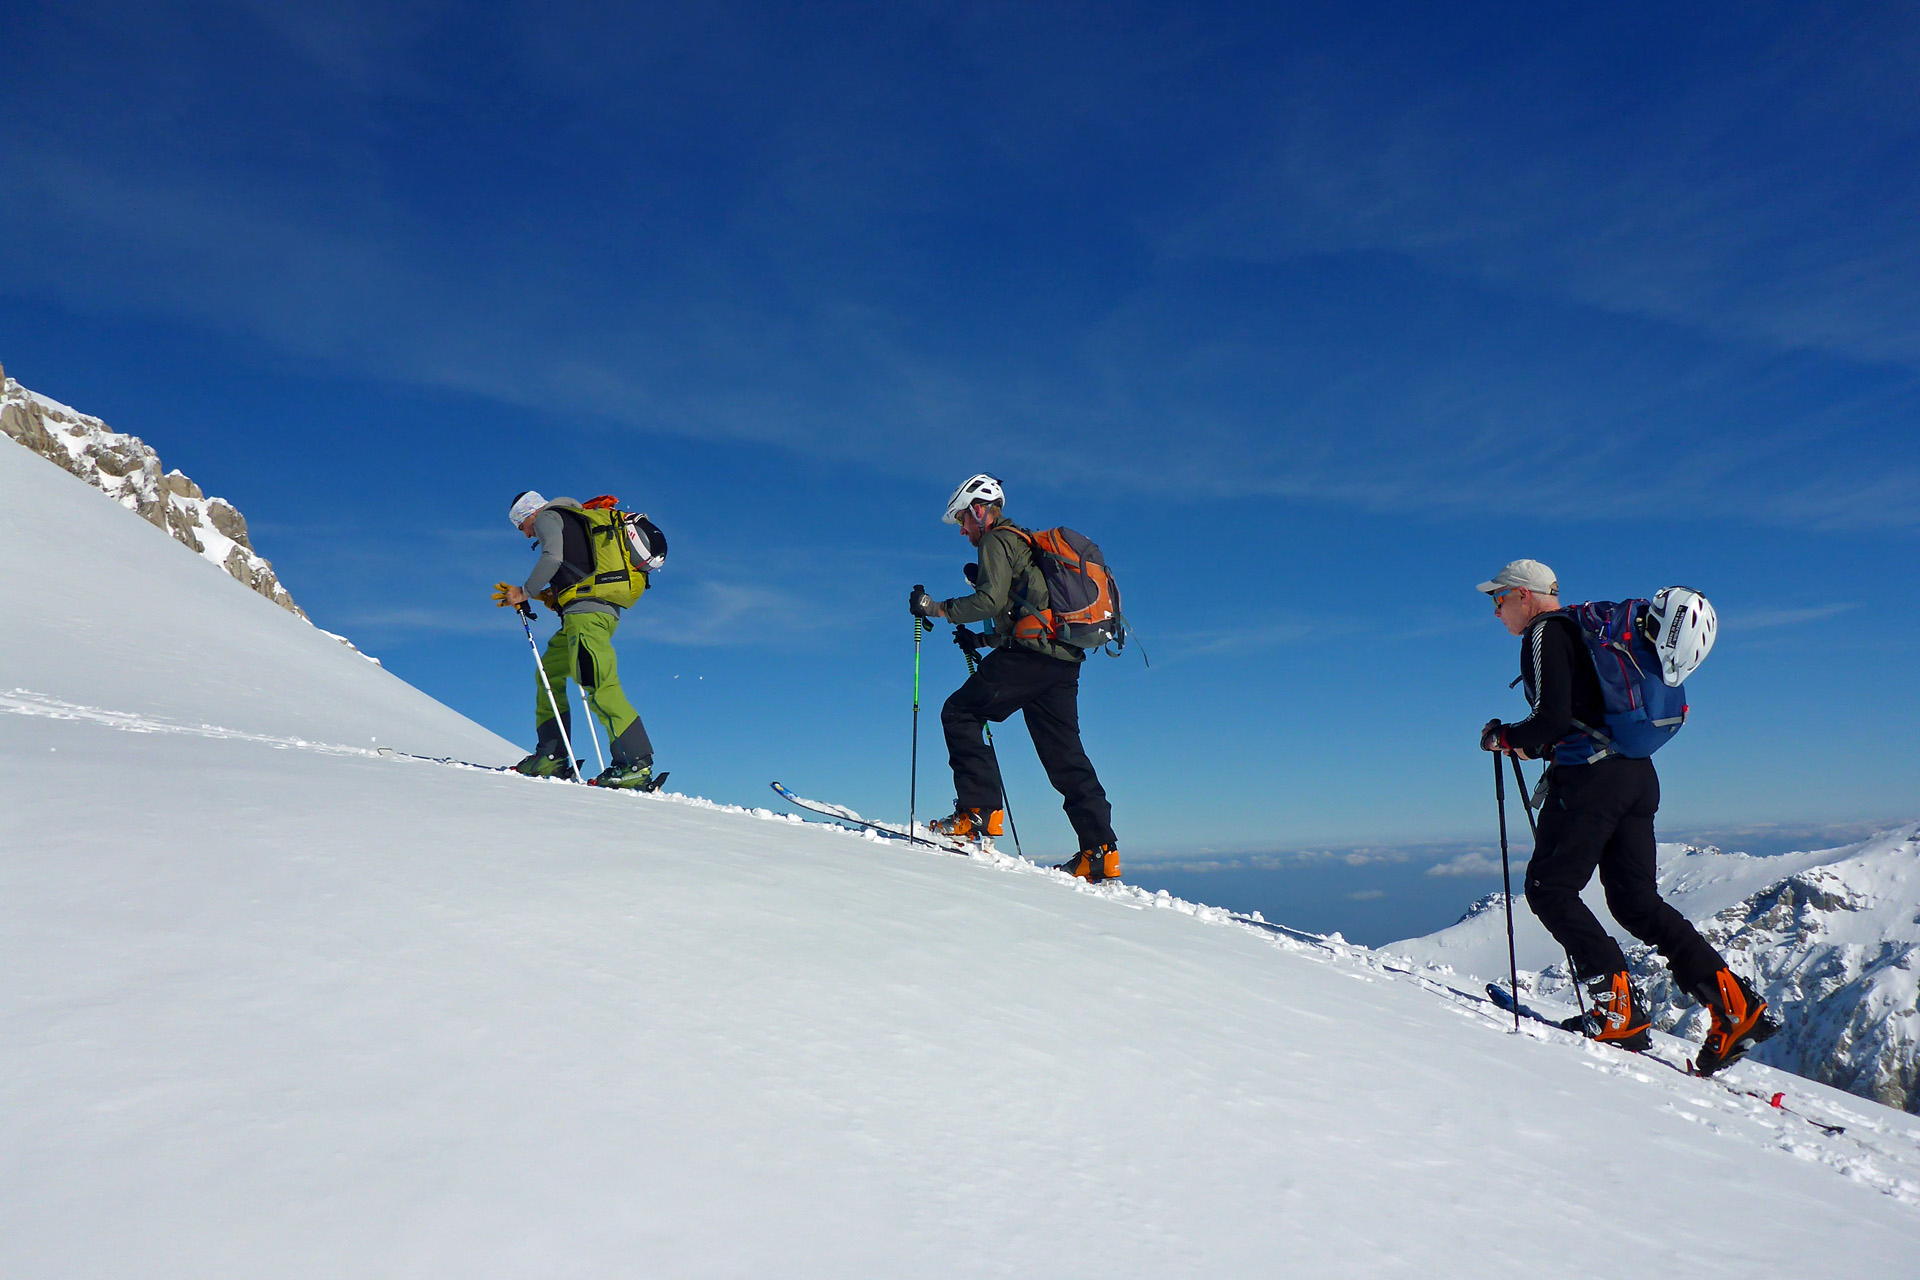 Skinning up to Liakoura, the highest peak in Greece